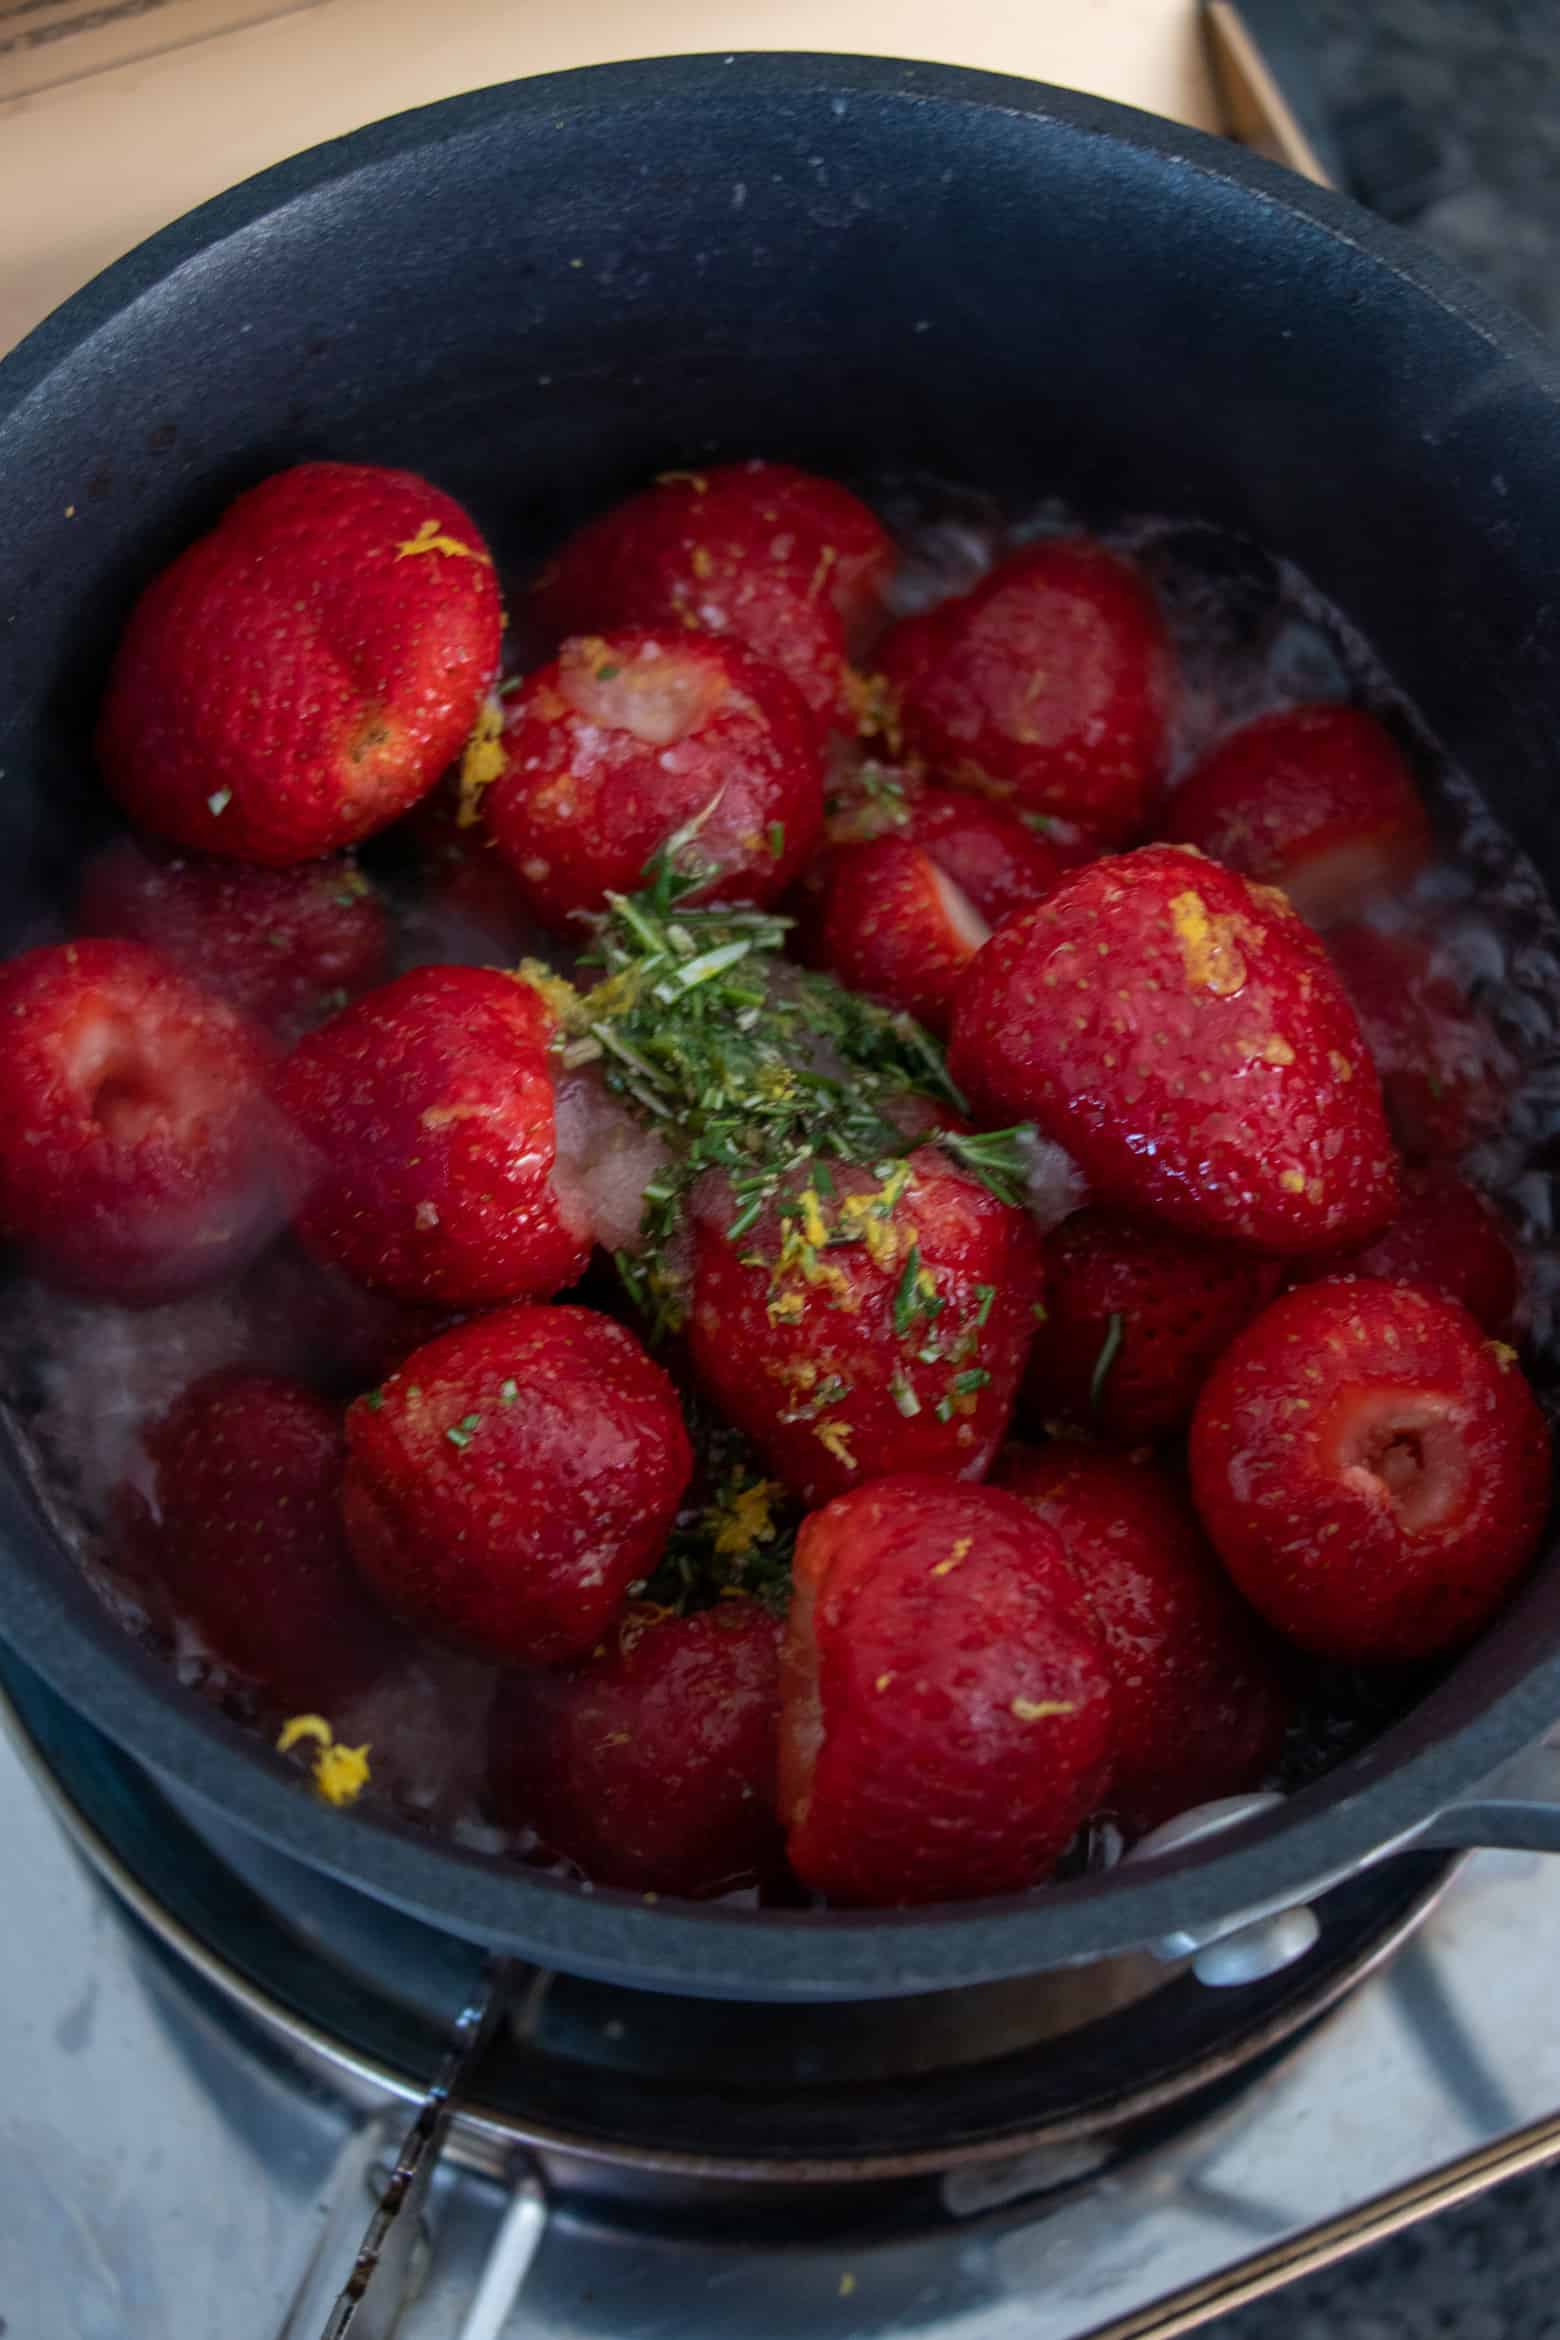 strawberries and sauce ingredients in a pot.